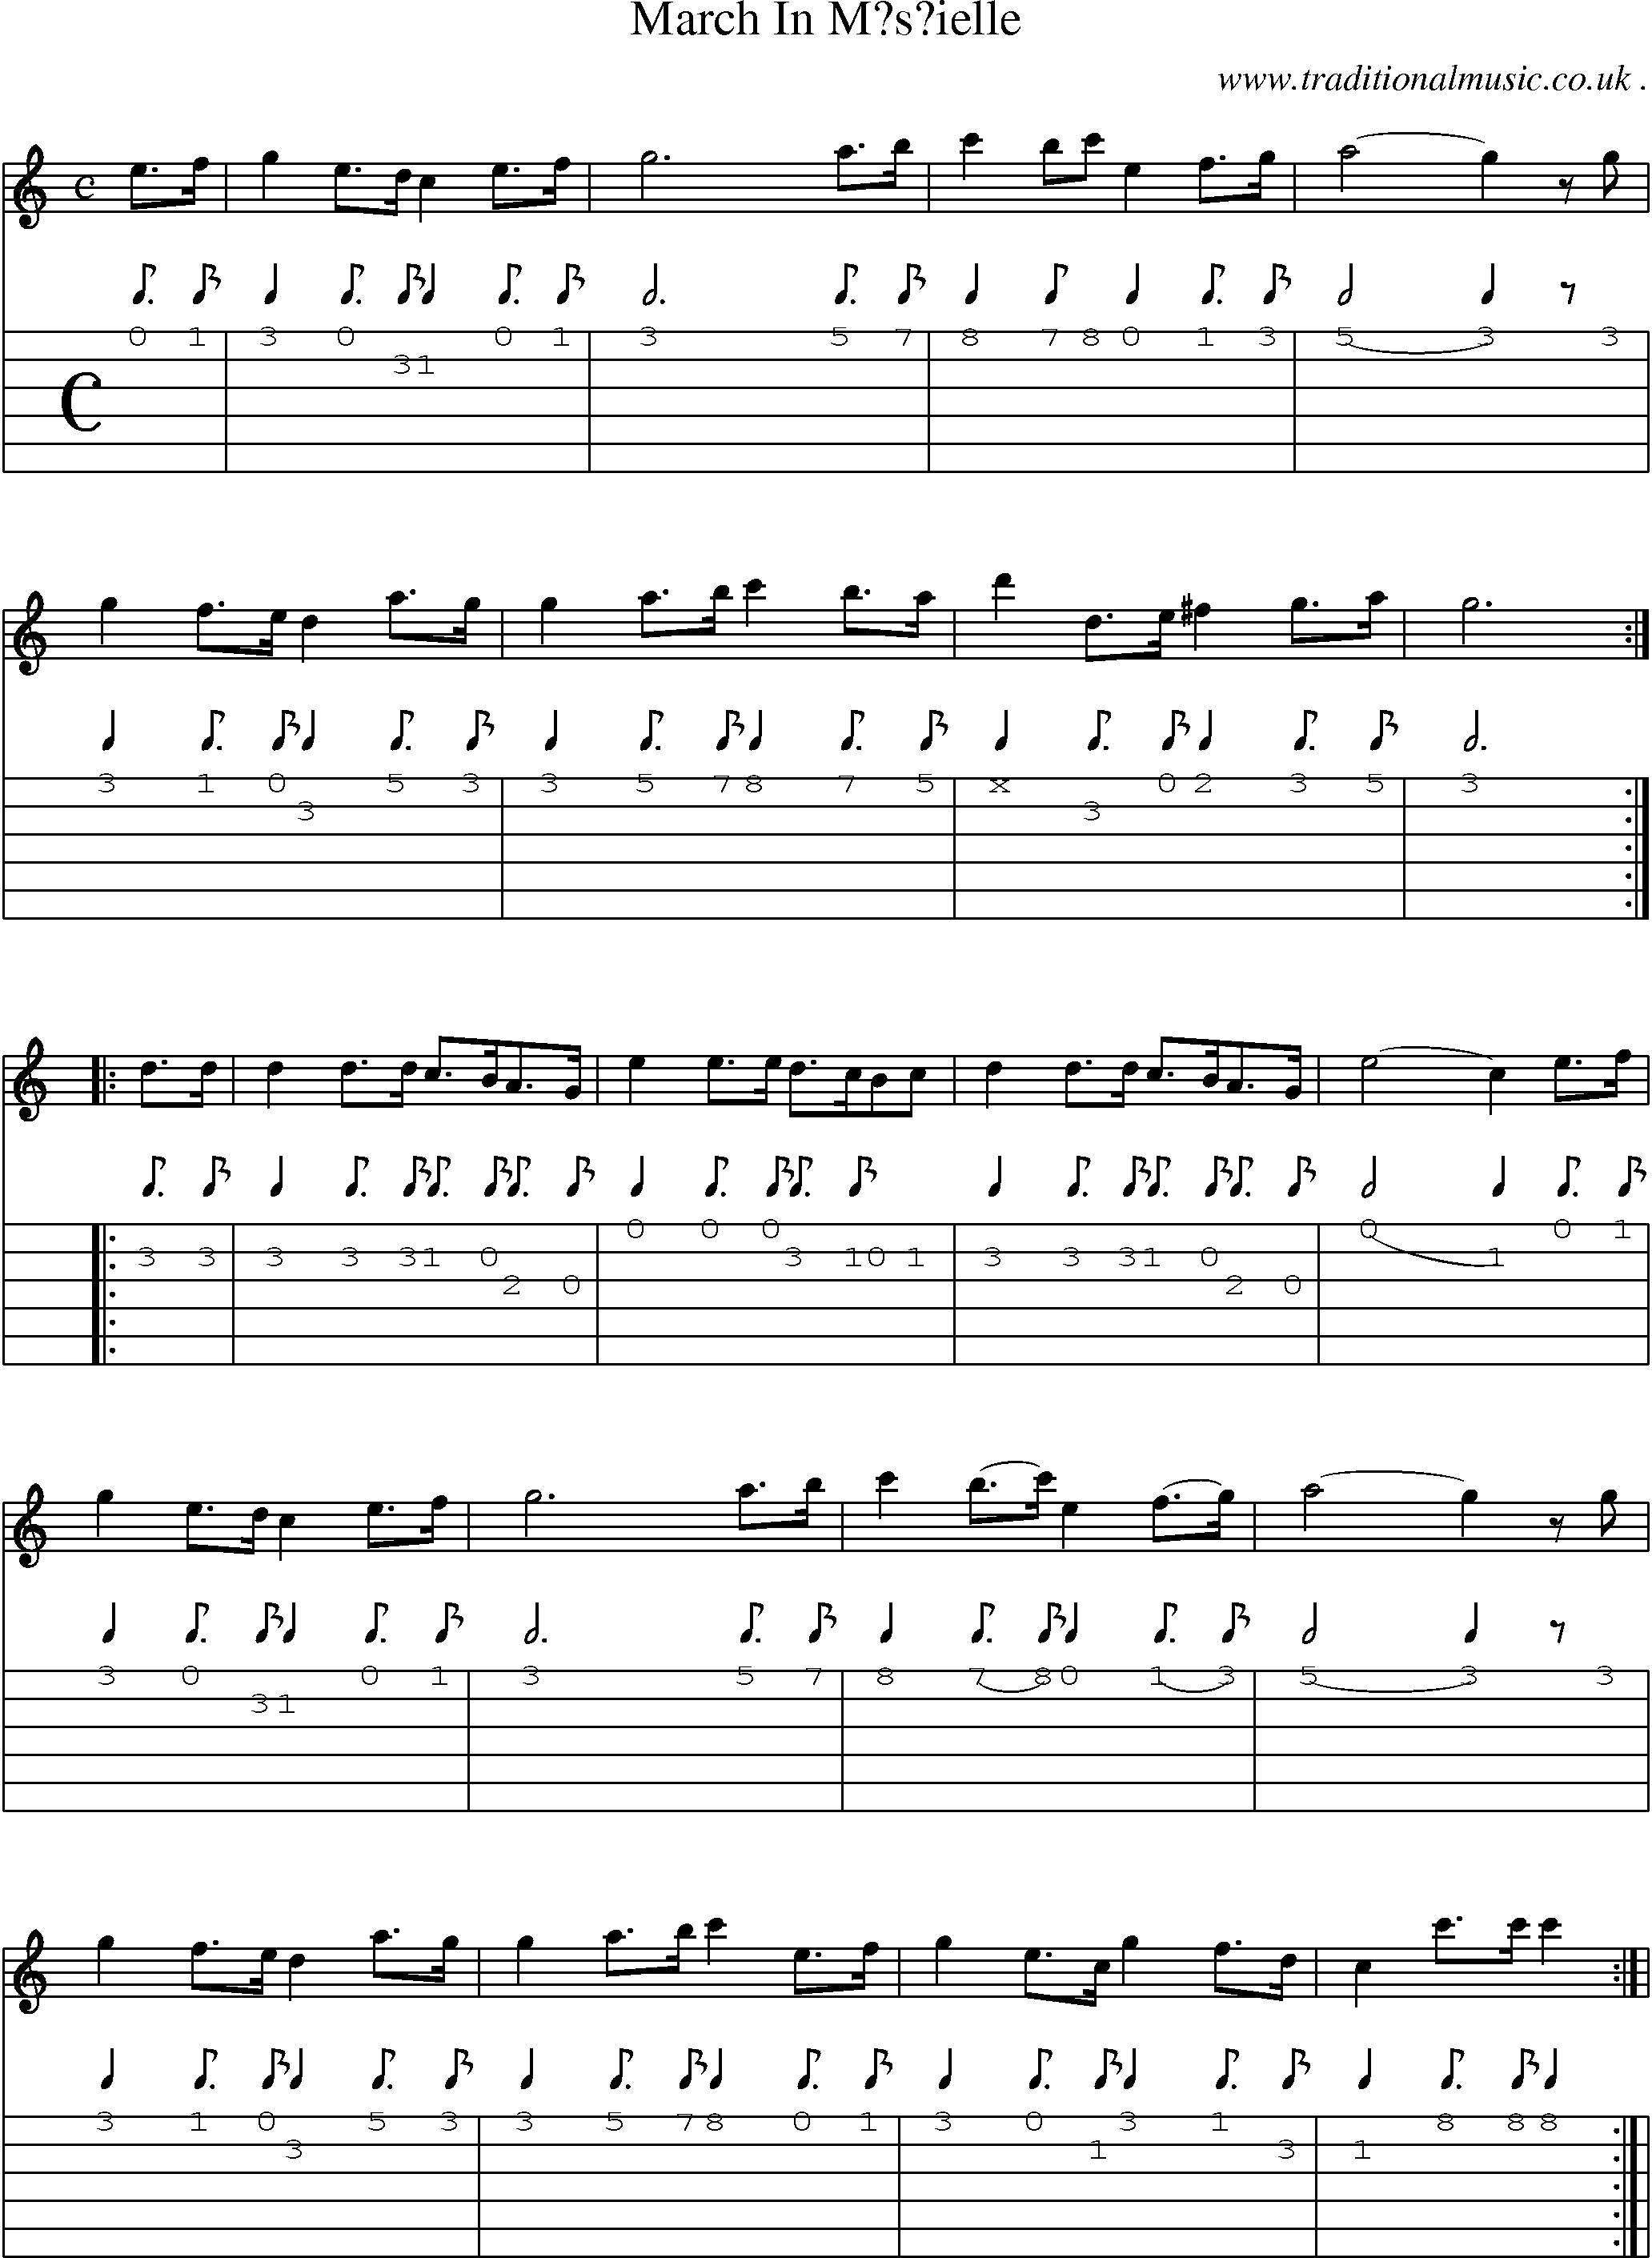 Sheet-Music and Guitar Tabs for March In Msielle